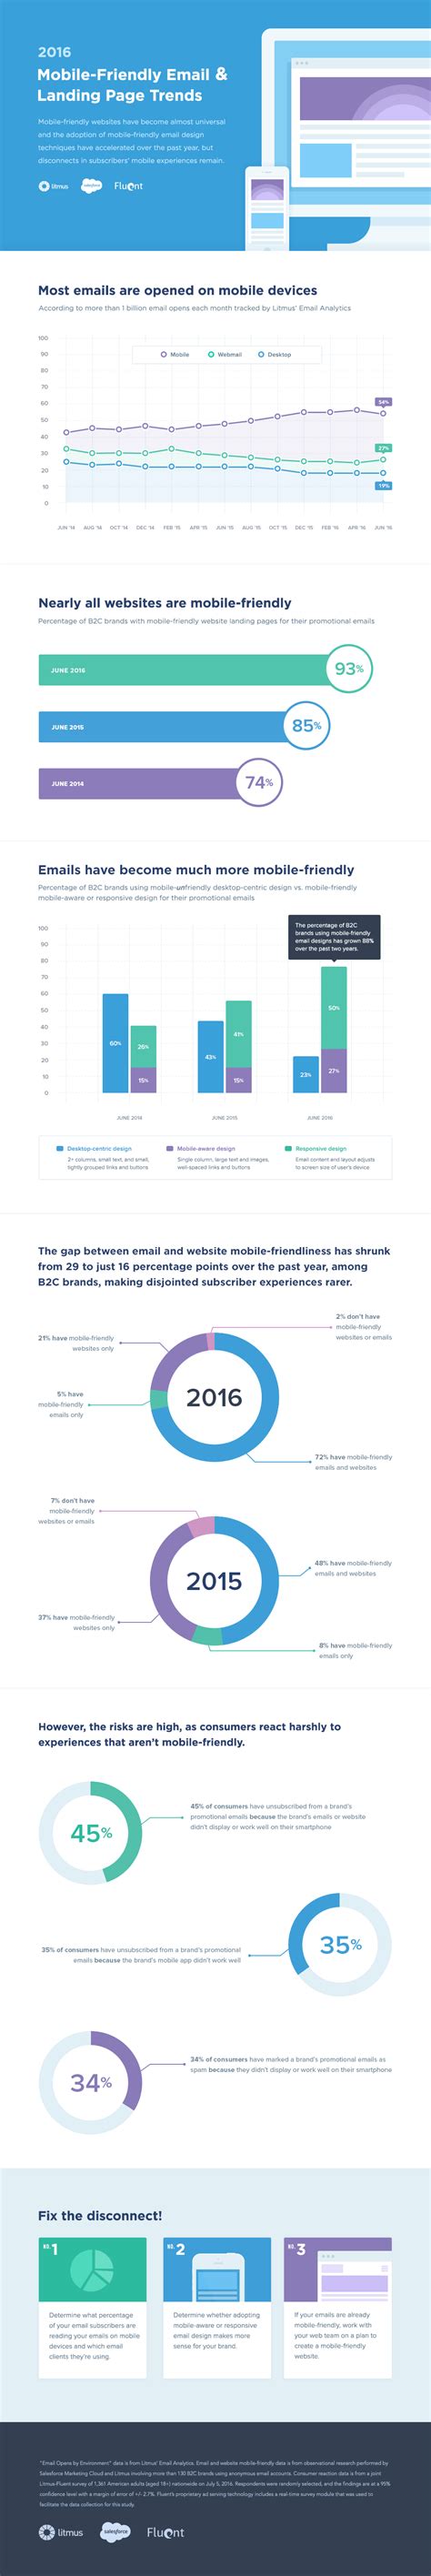 mobile friendly email landing page trends infographic litmus